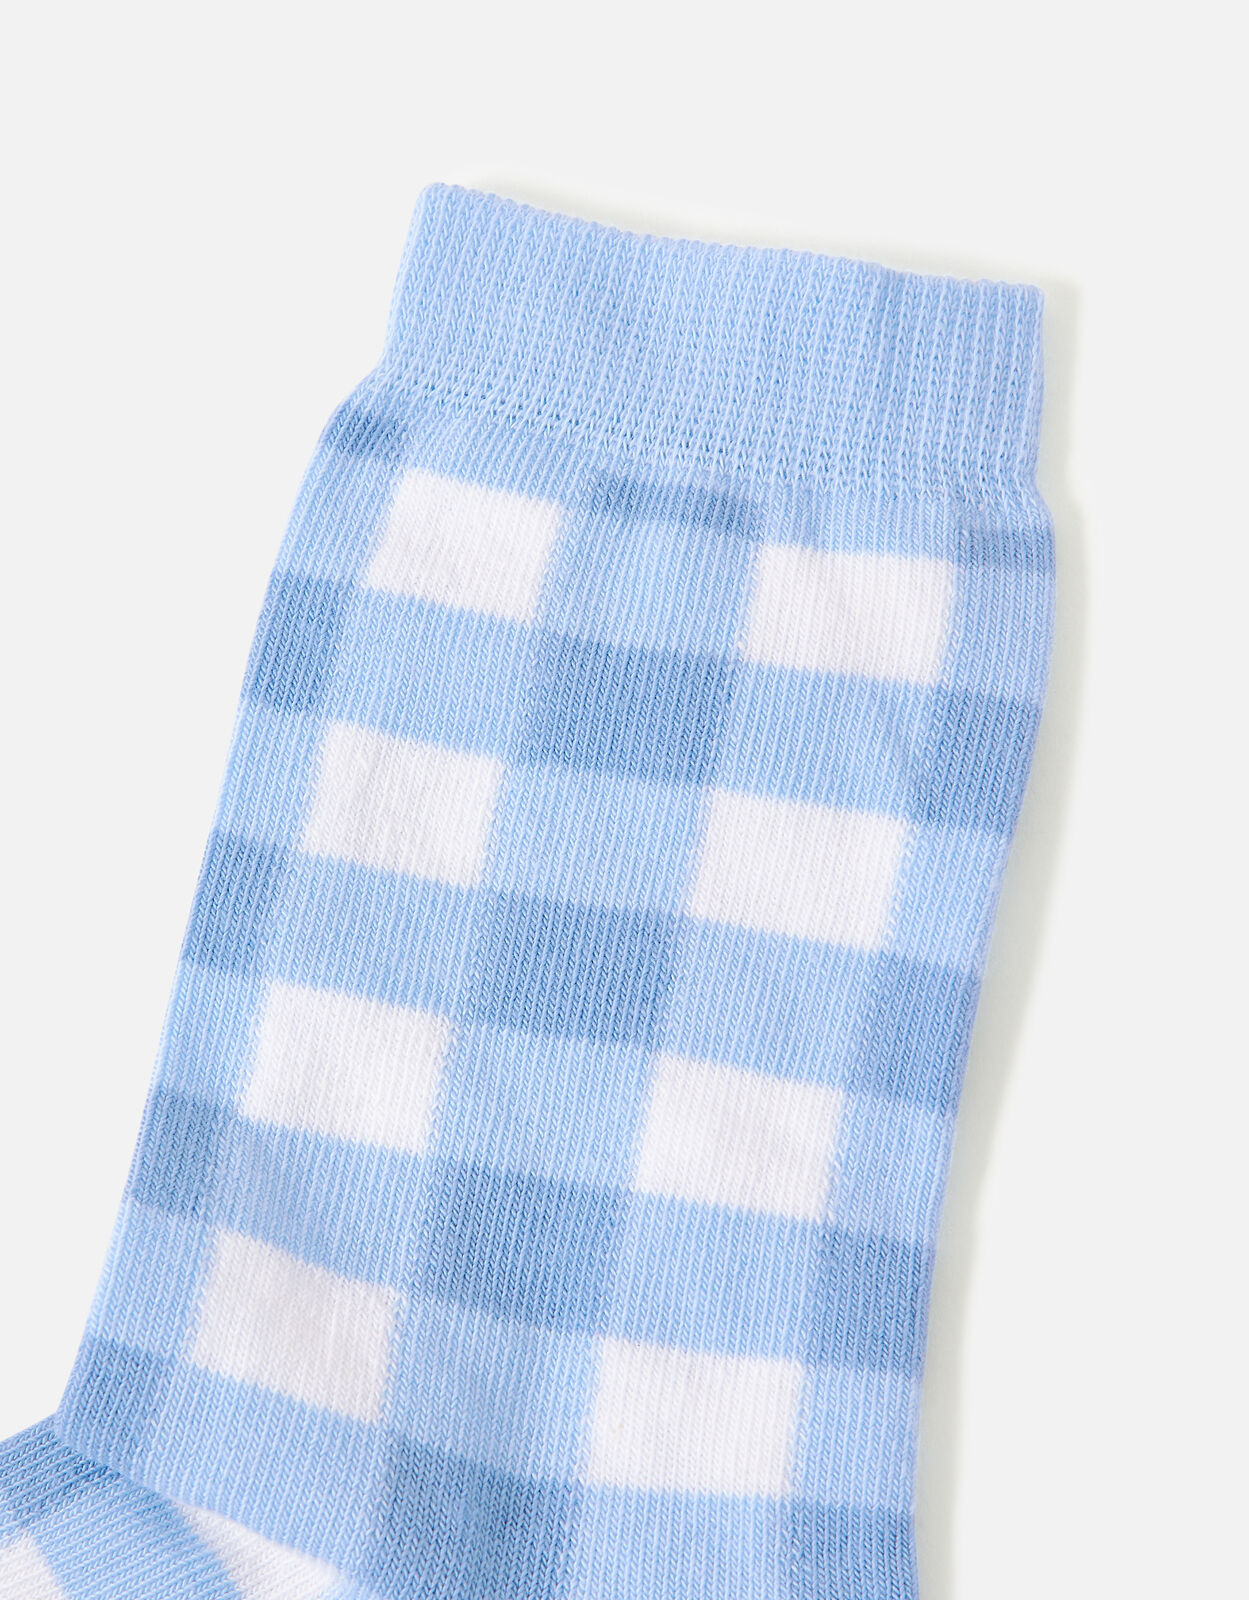 Accessorize BNWOT Accessorize Blue Gingham Check Socks Cotton blend One Size 4-7 